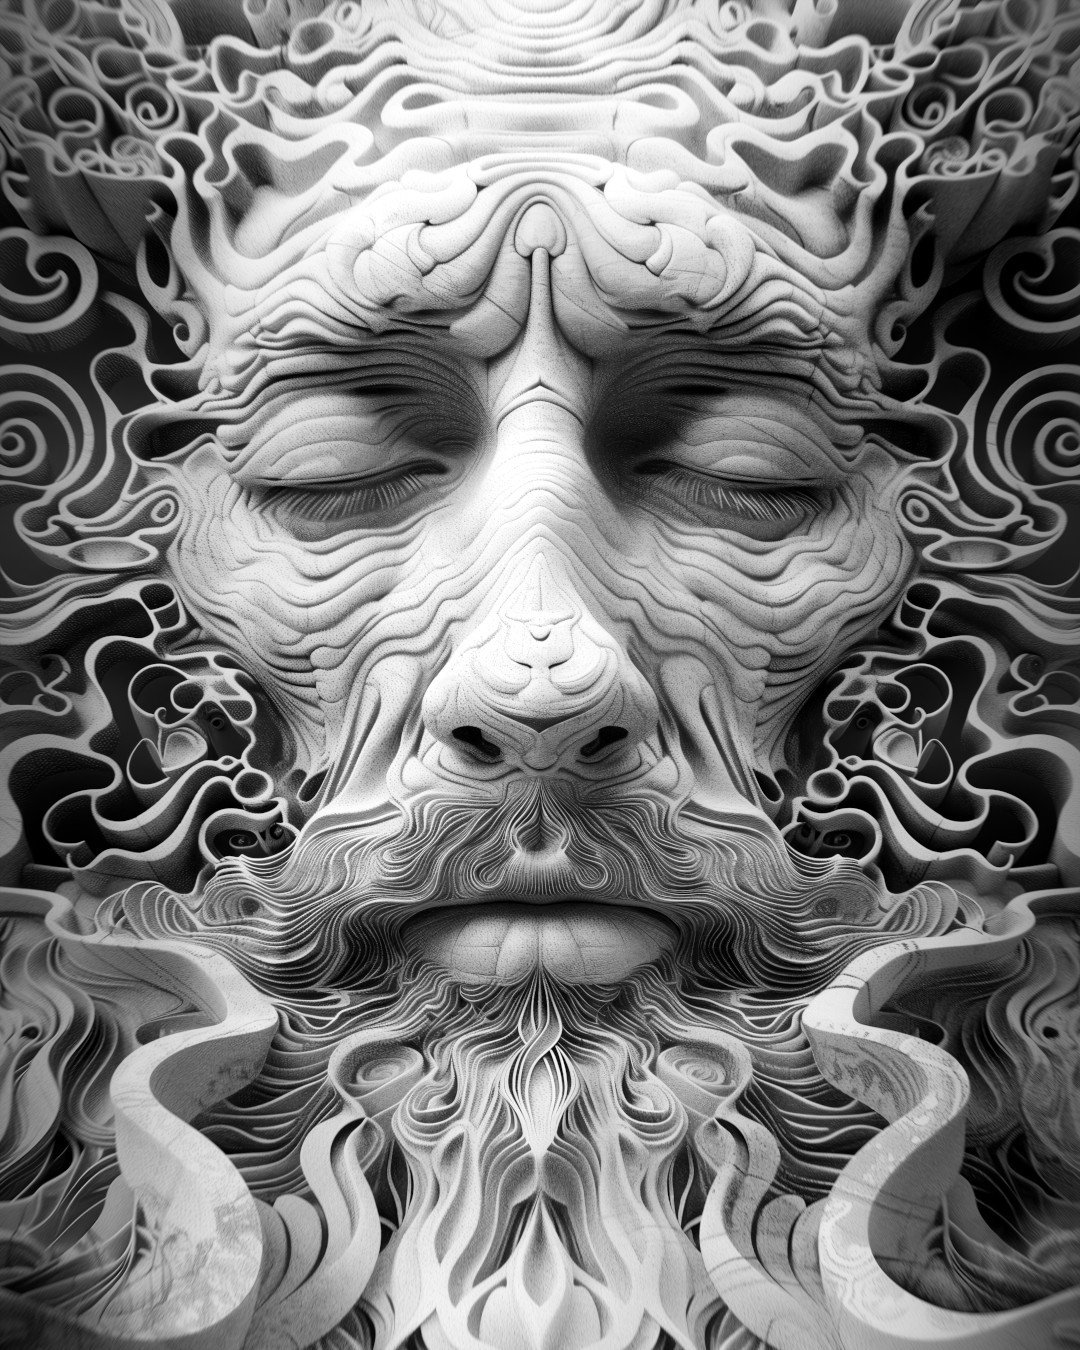 Old man's face with long beard, swirling patterns, grayscale